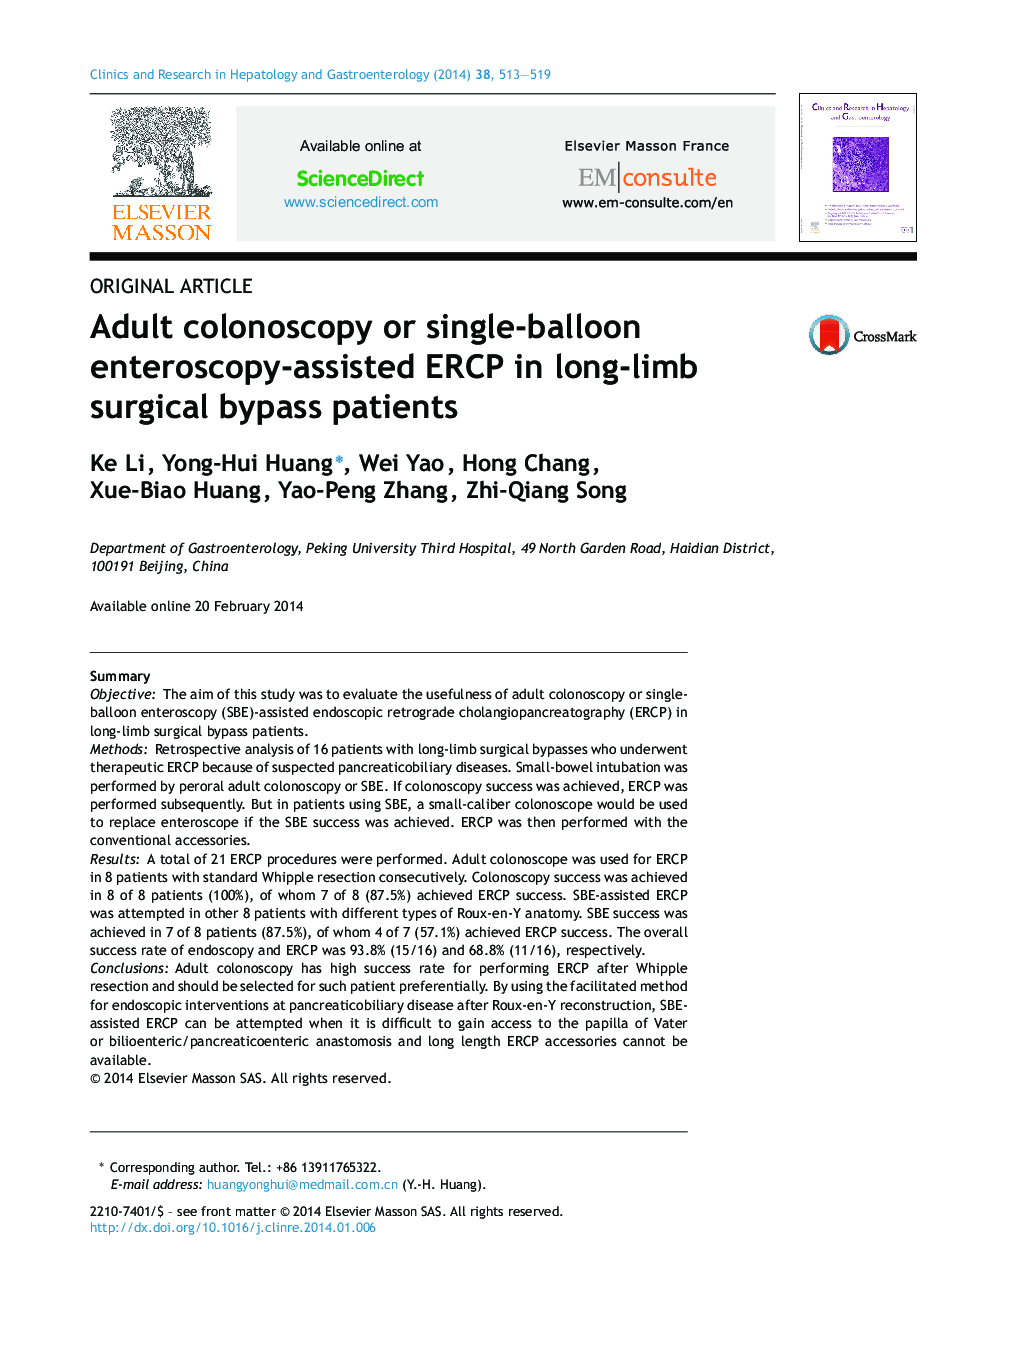 Adult colonoscopy or single-balloon enteroscopy-assisted ERCP in long-limb surgical bypass patients